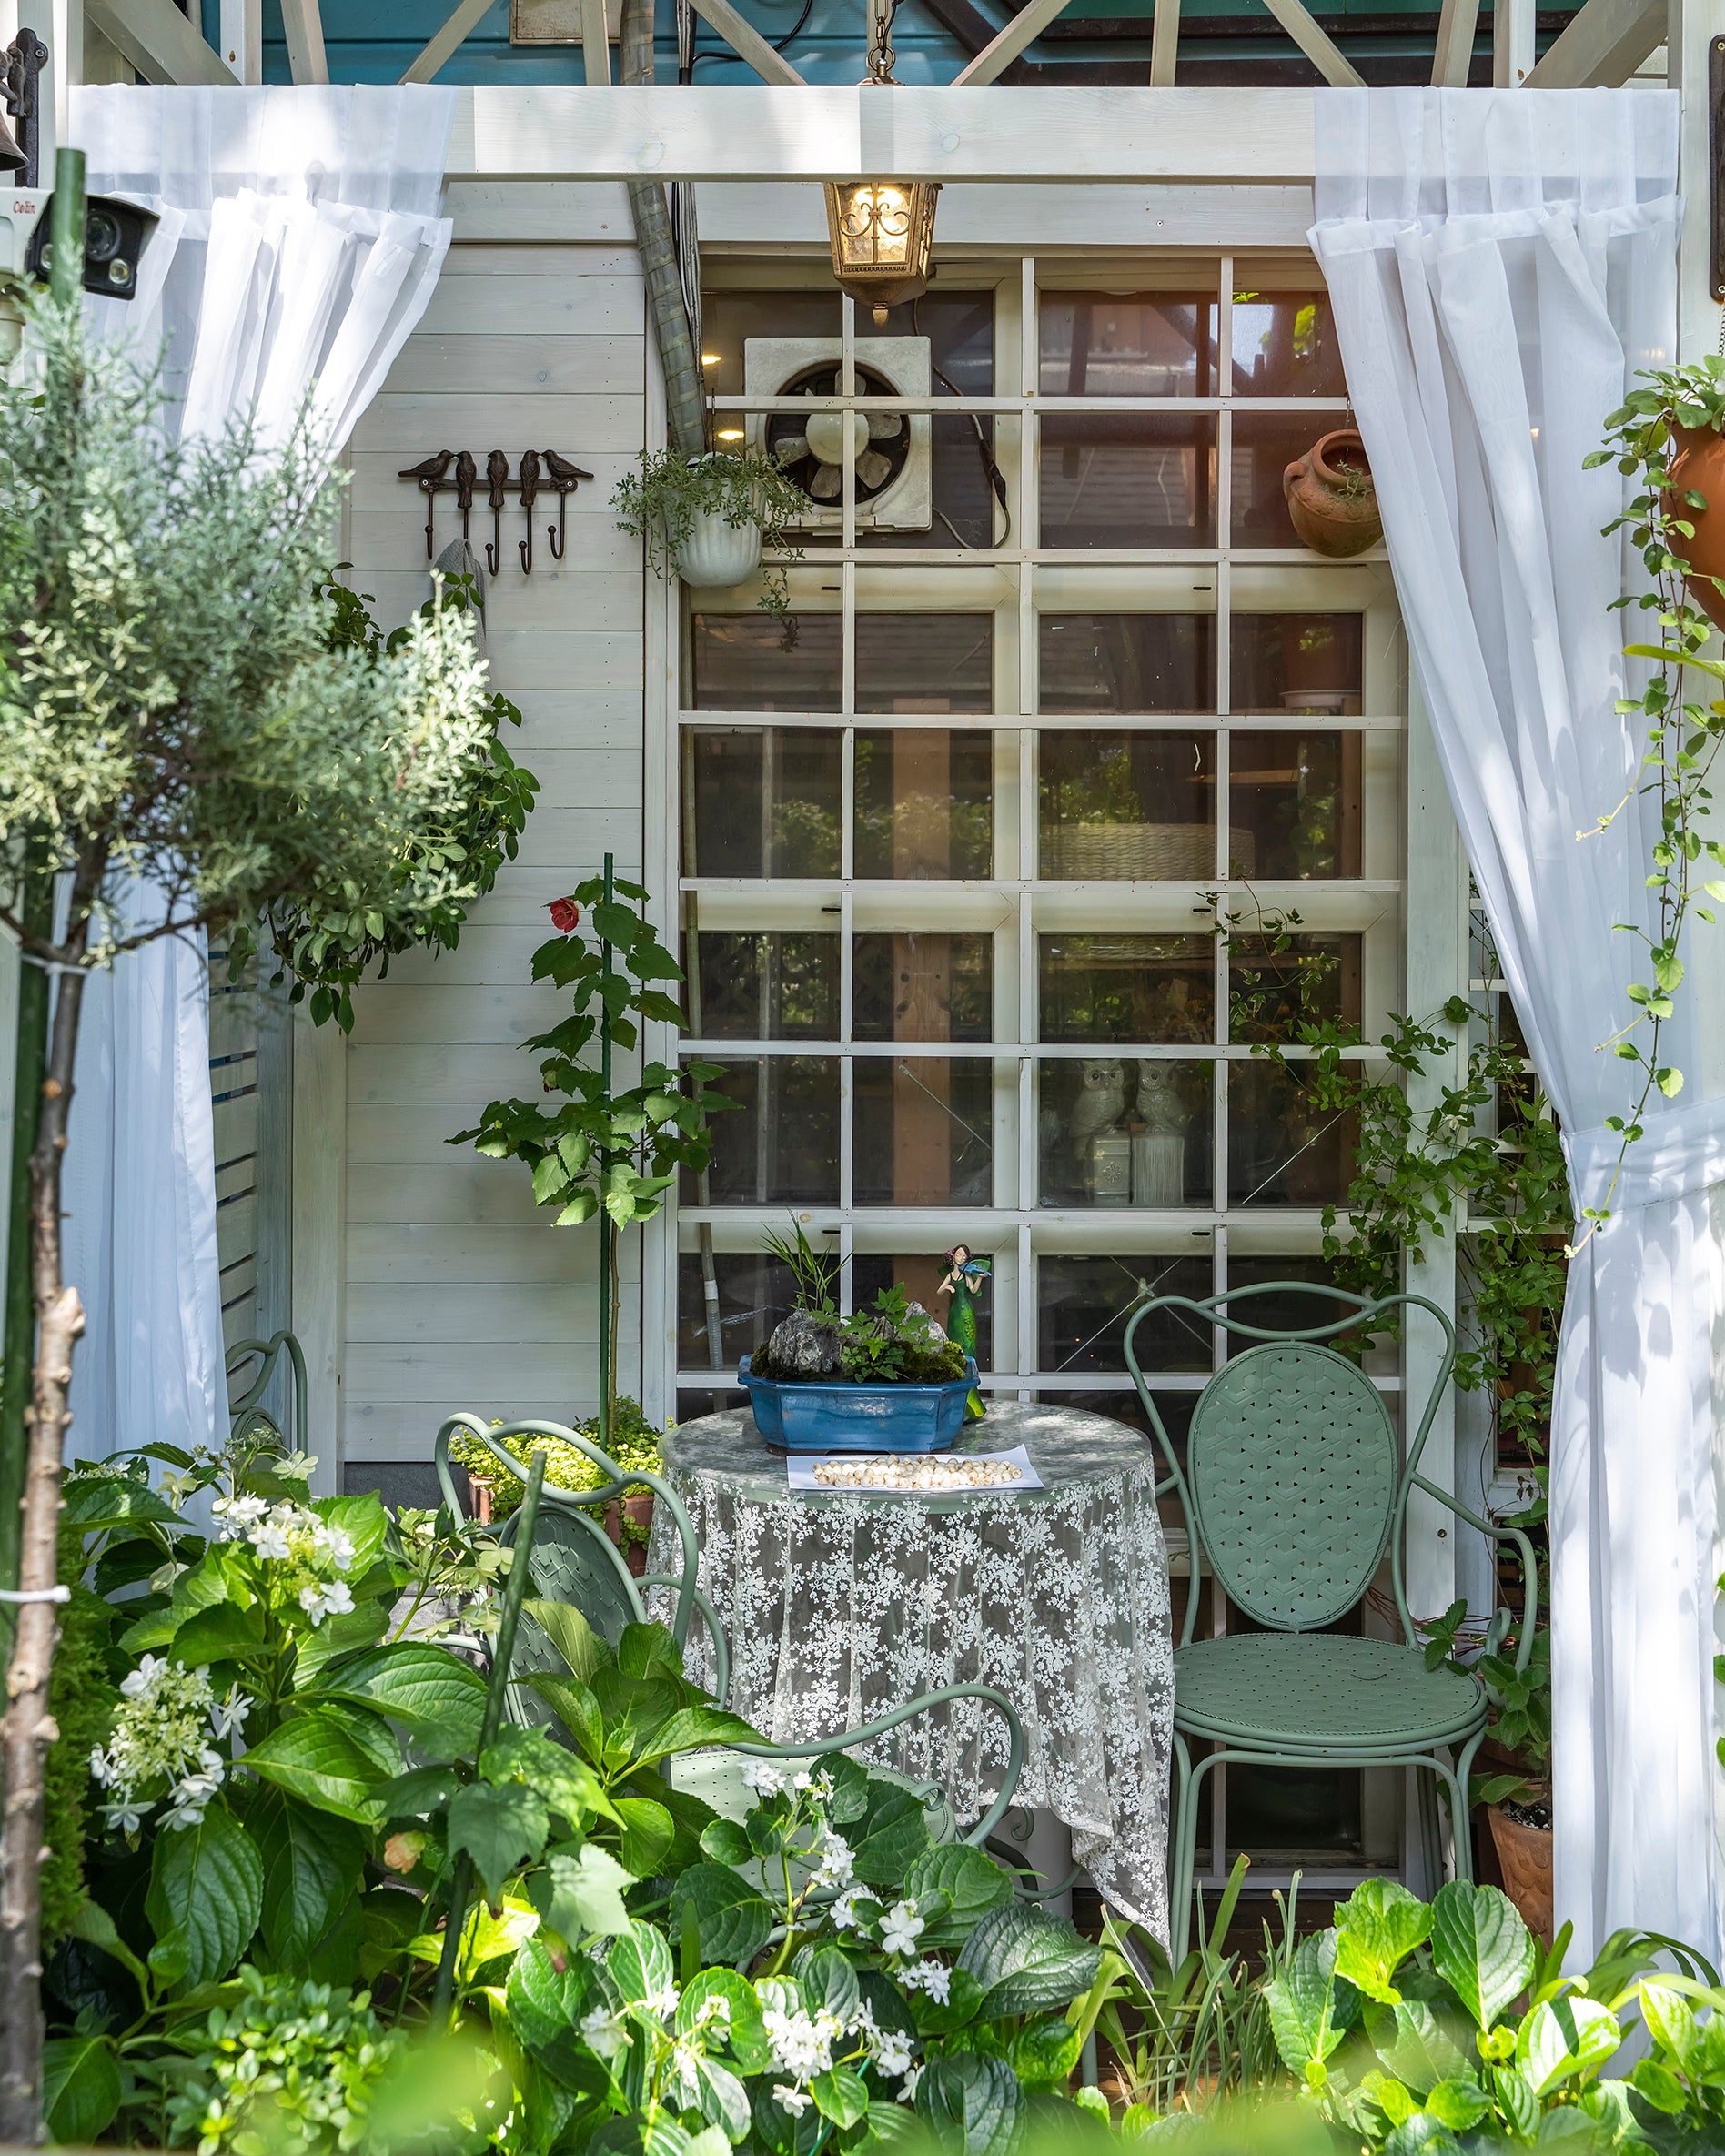 Looking at the back porch from outside. There is a little metal table and chair decorated nicely, surrounded by lush green plants.